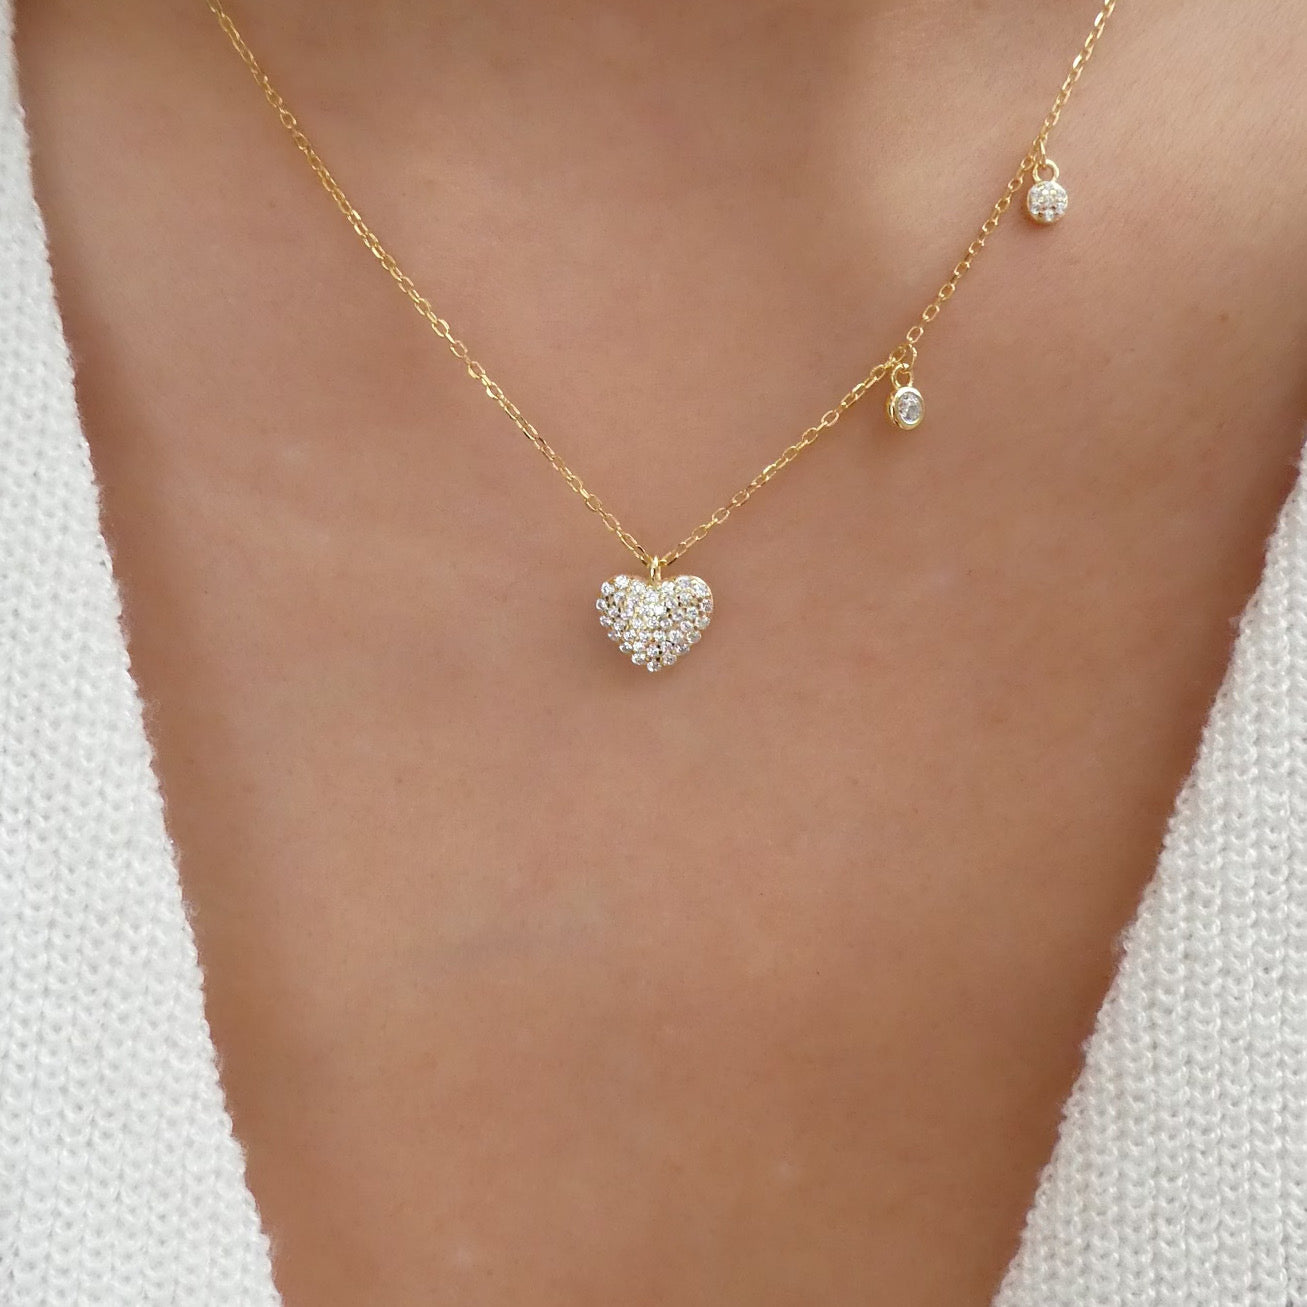 Silver-tone Rhinestone Cup Chain Heart Pendant Necklace | Icing US